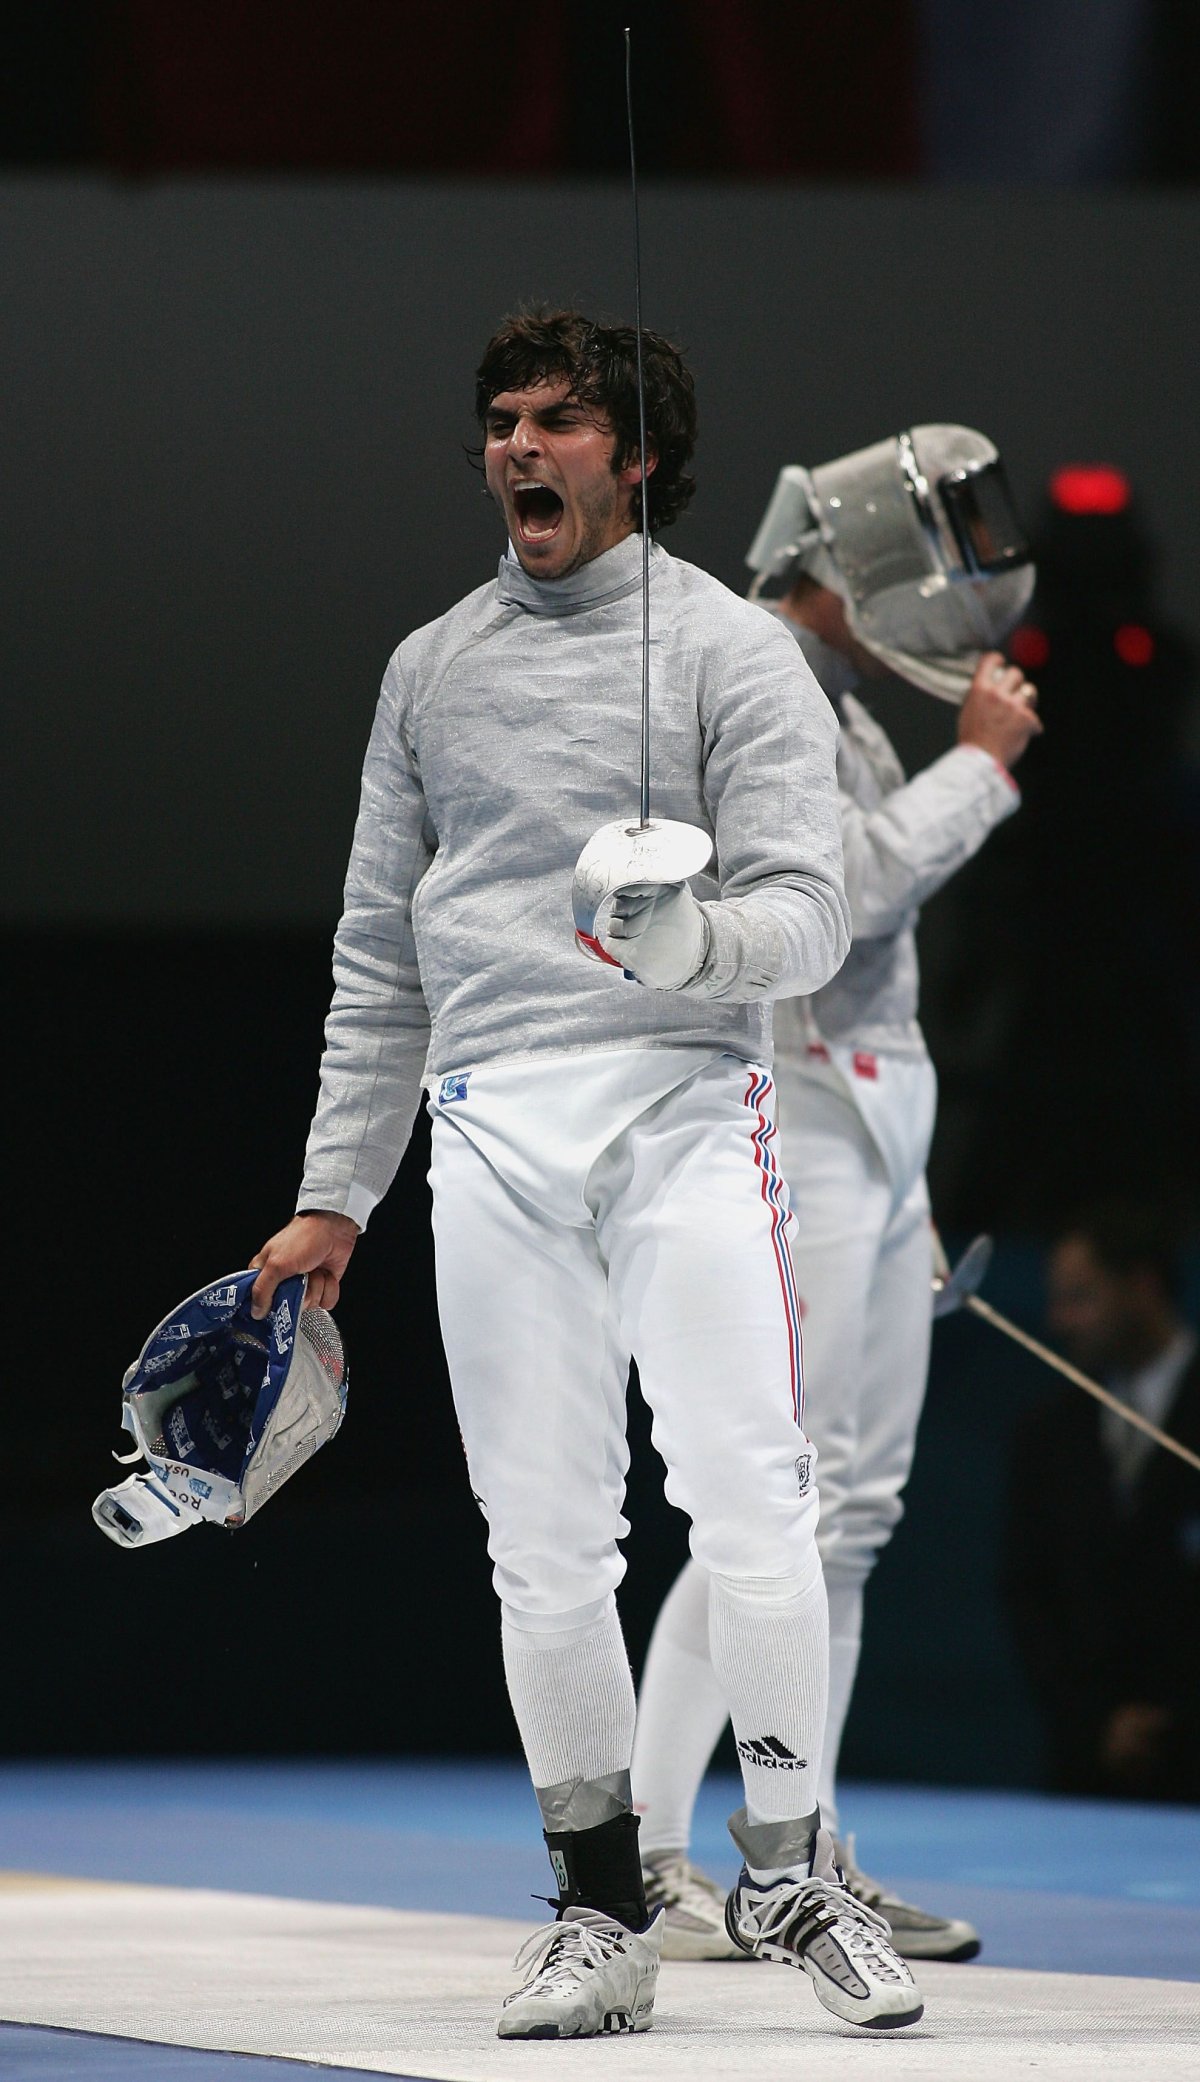 Jason Rogers sexual dysfunction athlete fencer